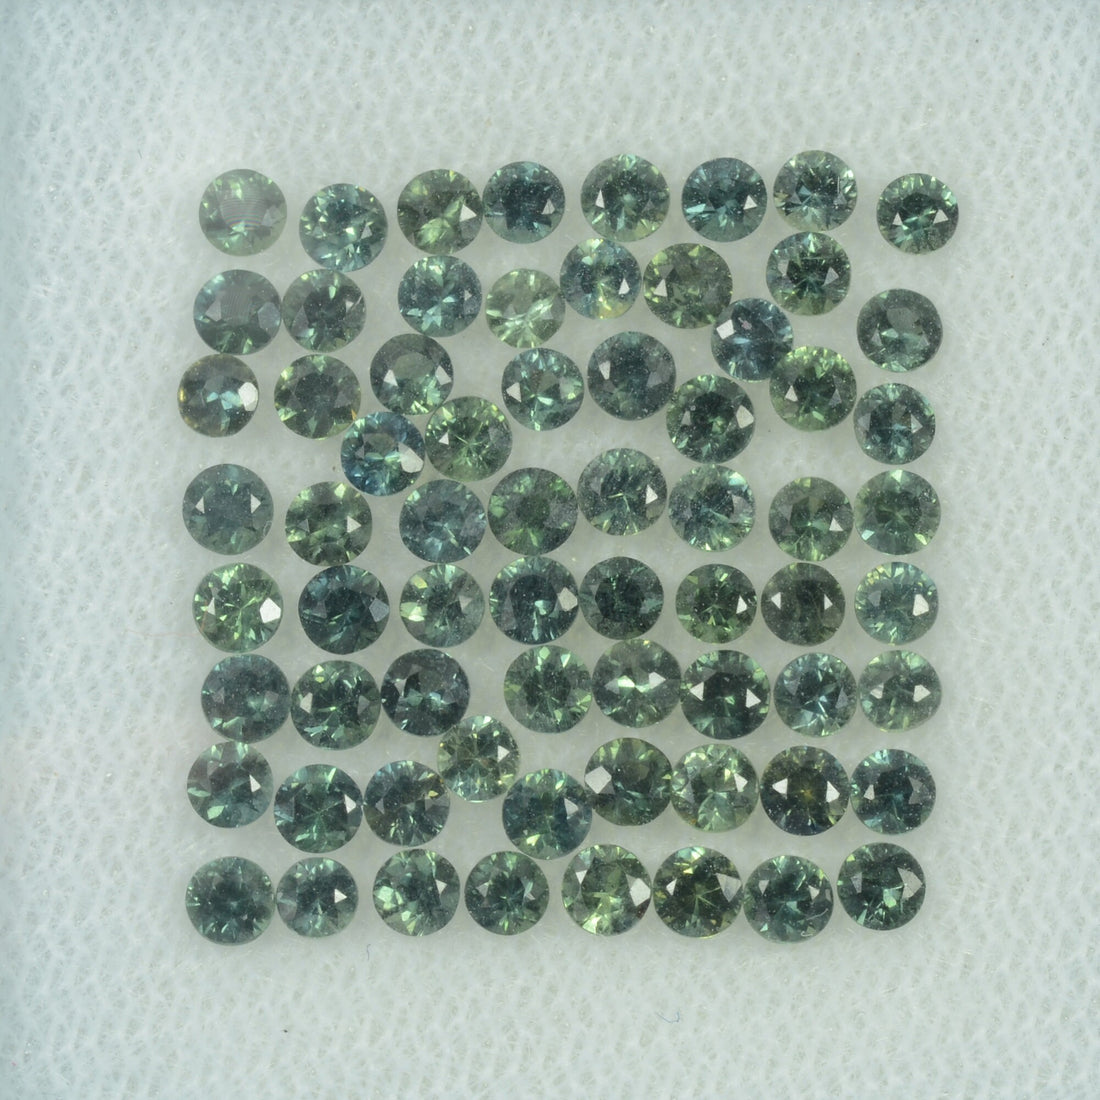 2.0-3.5 mm Natural Teal Green Sapphire Loose Gemstone Round Diamond Cut Vs Quality Color